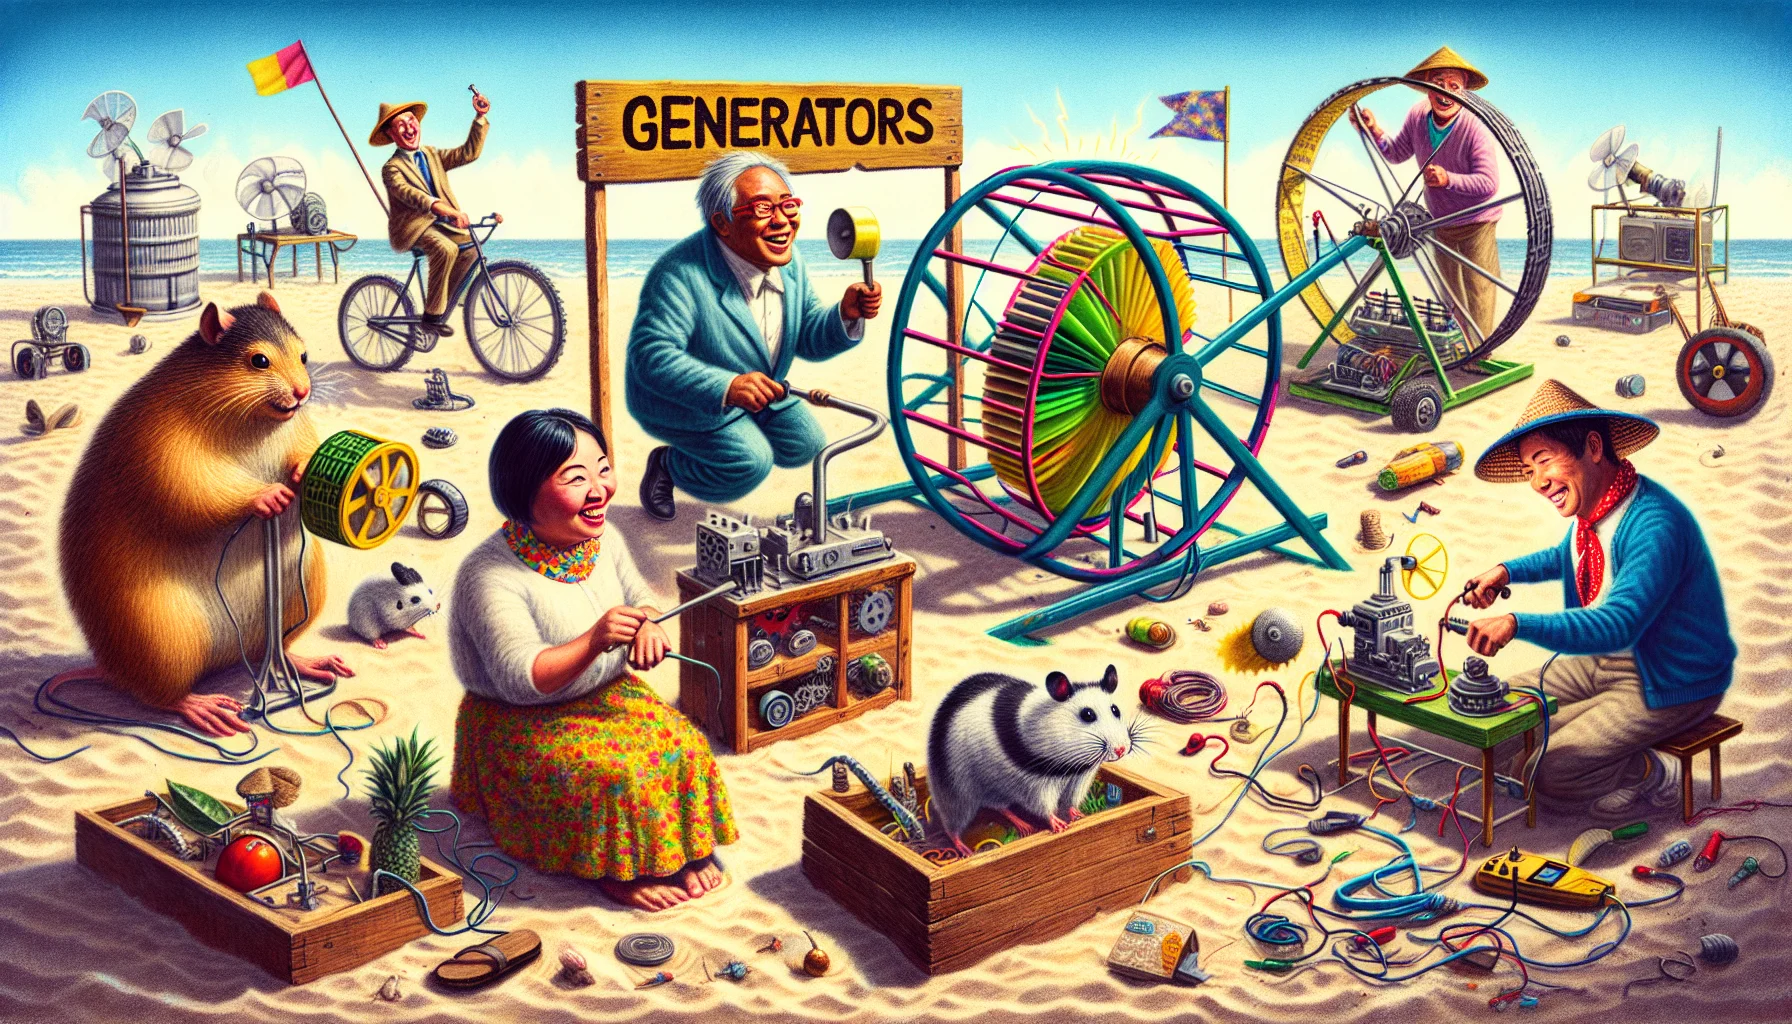 Create an amusing scene illustrating the Generators Category in a power generation contest. The requirements of the contest are to produce electricity in a unique and innovative way. Picture a sandy beach with various competitors scattered around, each using different strange, yet effective means of generating electricity. A man dressed as a hamster running in a giant wheel, a pair of middle-aged women cranking a large, colorful hand-operated generator, a young Hispanic child making a contraption out of recycled objects, and an elderly Asian man harnessing the power of the sun with a network of shiny mirrors. They're all grinning widely, driven by the fun and excitement of the competition and the desire to generate electricity.